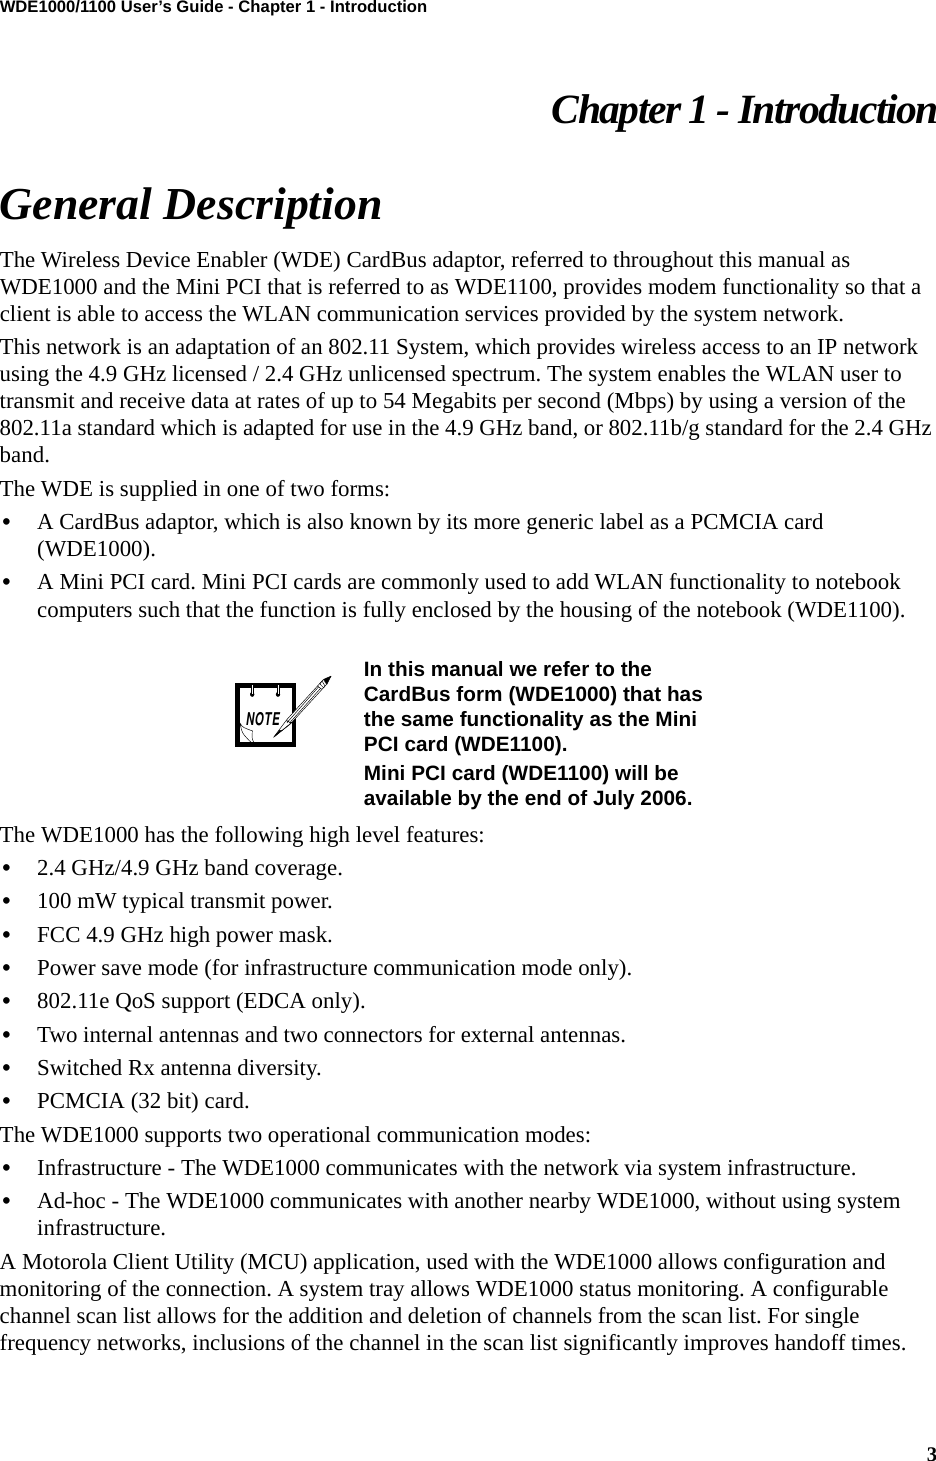 3WDE1000/1100 User’s Guide - Chapter 1 - IntroductionChapter 1 - IntroductionGeneral DescriptionThe Wireless Device Enabler (WDE) CardBus adaptor, referred to throughout this manual as WDE1000 and the Mini PCI that is referred to as WDE1100, provides modem functionality so that a client is able to access the WLAN communication services provided by the system network.This network is an adaptation of an 802.11 System, which provides wireless access to an IP network using the 4.9 GHz licensed / 2.4 GHz unlicensed spectrum. The system enables the WLAN user to transmit and receive data at rates of up to 54 Megabits per second (Mbps) by using a version of the 802.11a standard which is adapted for use in the 4.9 GHz band, or 802.11b/g standard for the 2.4 GHz band.The WDE is supplied in one of two forms: •A CardBus adaptor, which is also known by its more generic label as a PCMCIA card (WDE1000). •A Mini PCI card. Mini PCI cards are commonly used to add WLAN functionality to notebook computers such that the function is fully enclosed by the housing of the notebook (WDE1100).The WDE1000 has the following high level features:•2.4 GHz/4.9 GHz band coverage.•100 mW typical transmit power.•FCC 4.9 GHz high power mask.•Power save mode (for infrastructure communication mode only).•802.11e QoS support (EDCA only).•Two internal antennas and two connectors for external antennas.•Switched Rx antenna diversity.•PCMCIA (32 bit) card.The WDE1000 supports two operational communication modes:•Infrastructure - The WDE1000 communicates with the network via system infrastructure.•Ad-hoc - The WDE1000 communicates with another nearby WDE1000, without using system infrastructure.A Motorola Client Utility (MCU) application, used with the WDE1000 allows configuration and monitoring of the connection. A system tray allows WDE1000 status monitoring. A configurable channel scan list allows for the addition and deletion of channels from the scan list. For single frequency networks, inclusions of the channel in the scan list significantly improves handoff times.In this manual we refer to the CardBus form (WDE1000) that has the same functionality as the Mini PCI card (WDE1100).Mini PCI card (WDE1100) will be available by the end of July 2006.NOTE